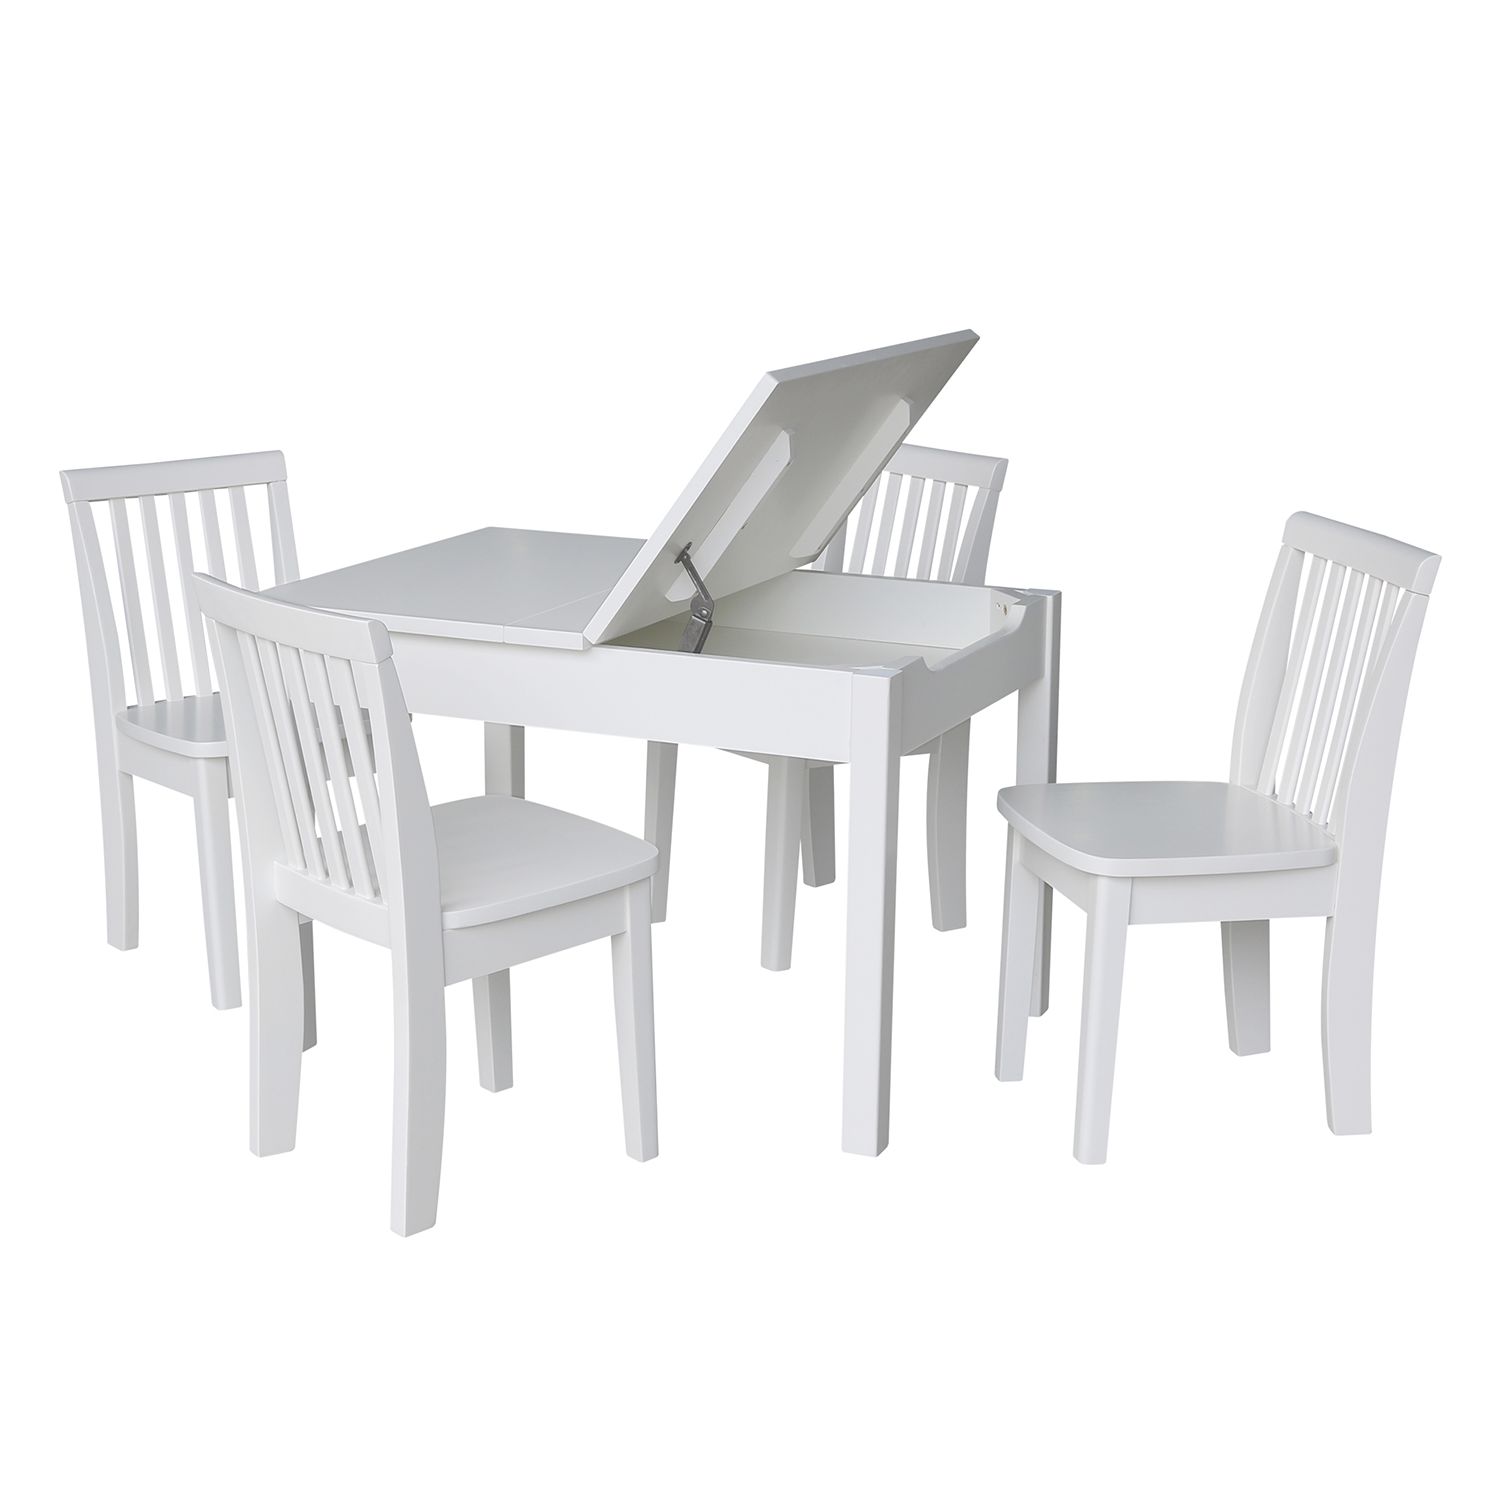 kohl children's table and chairs